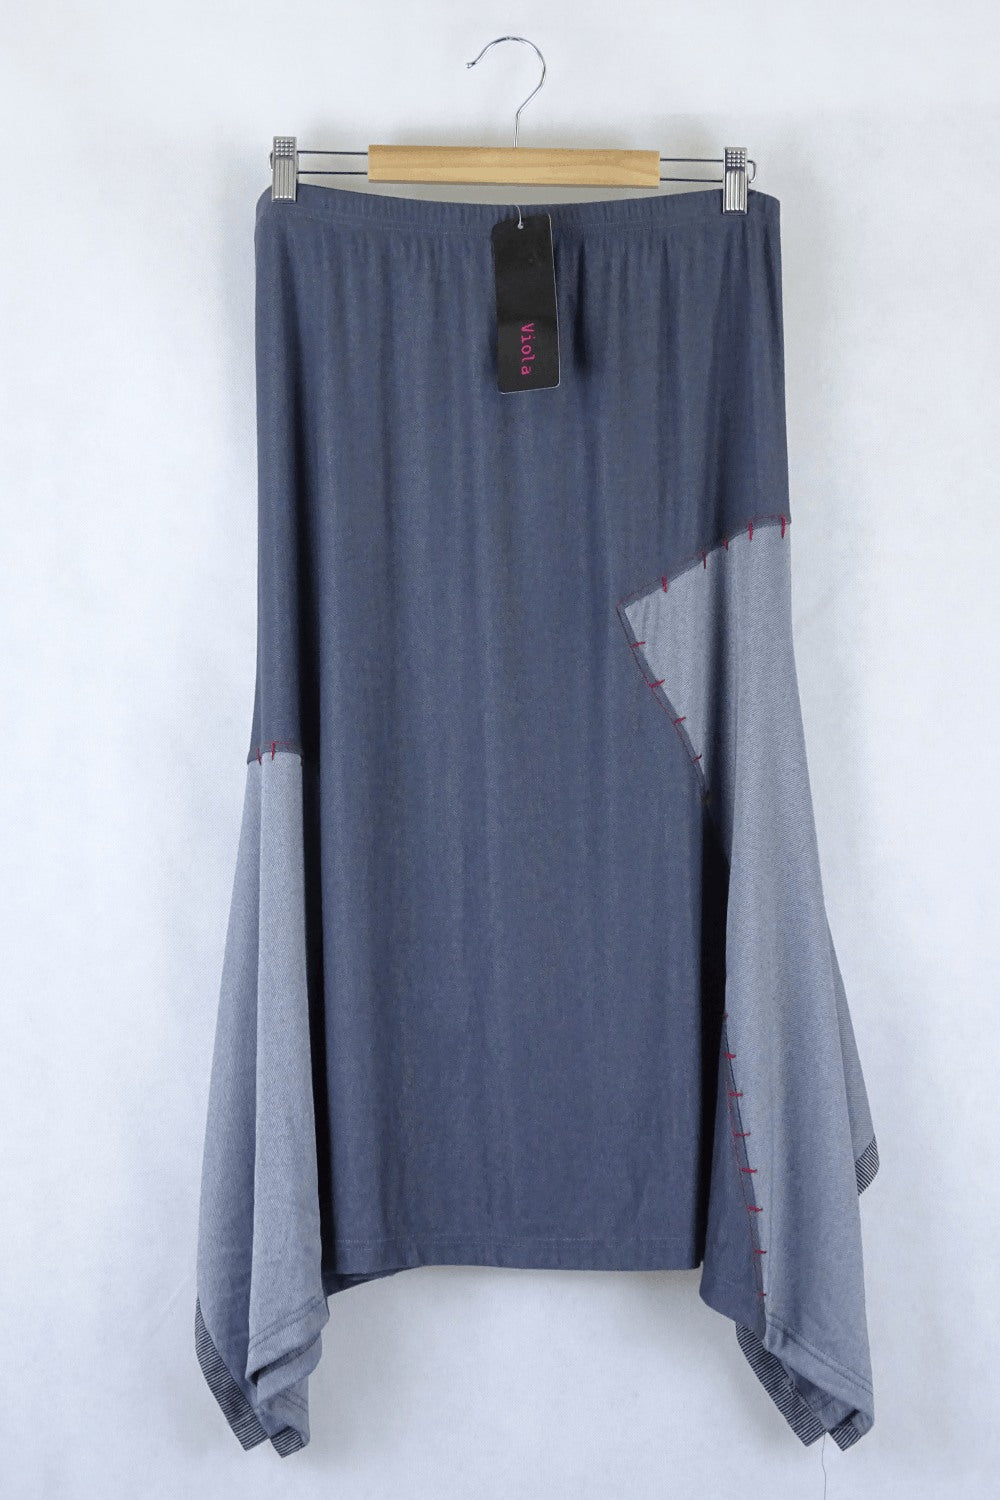 Viola Grey Skirt With Red Detail  Xl